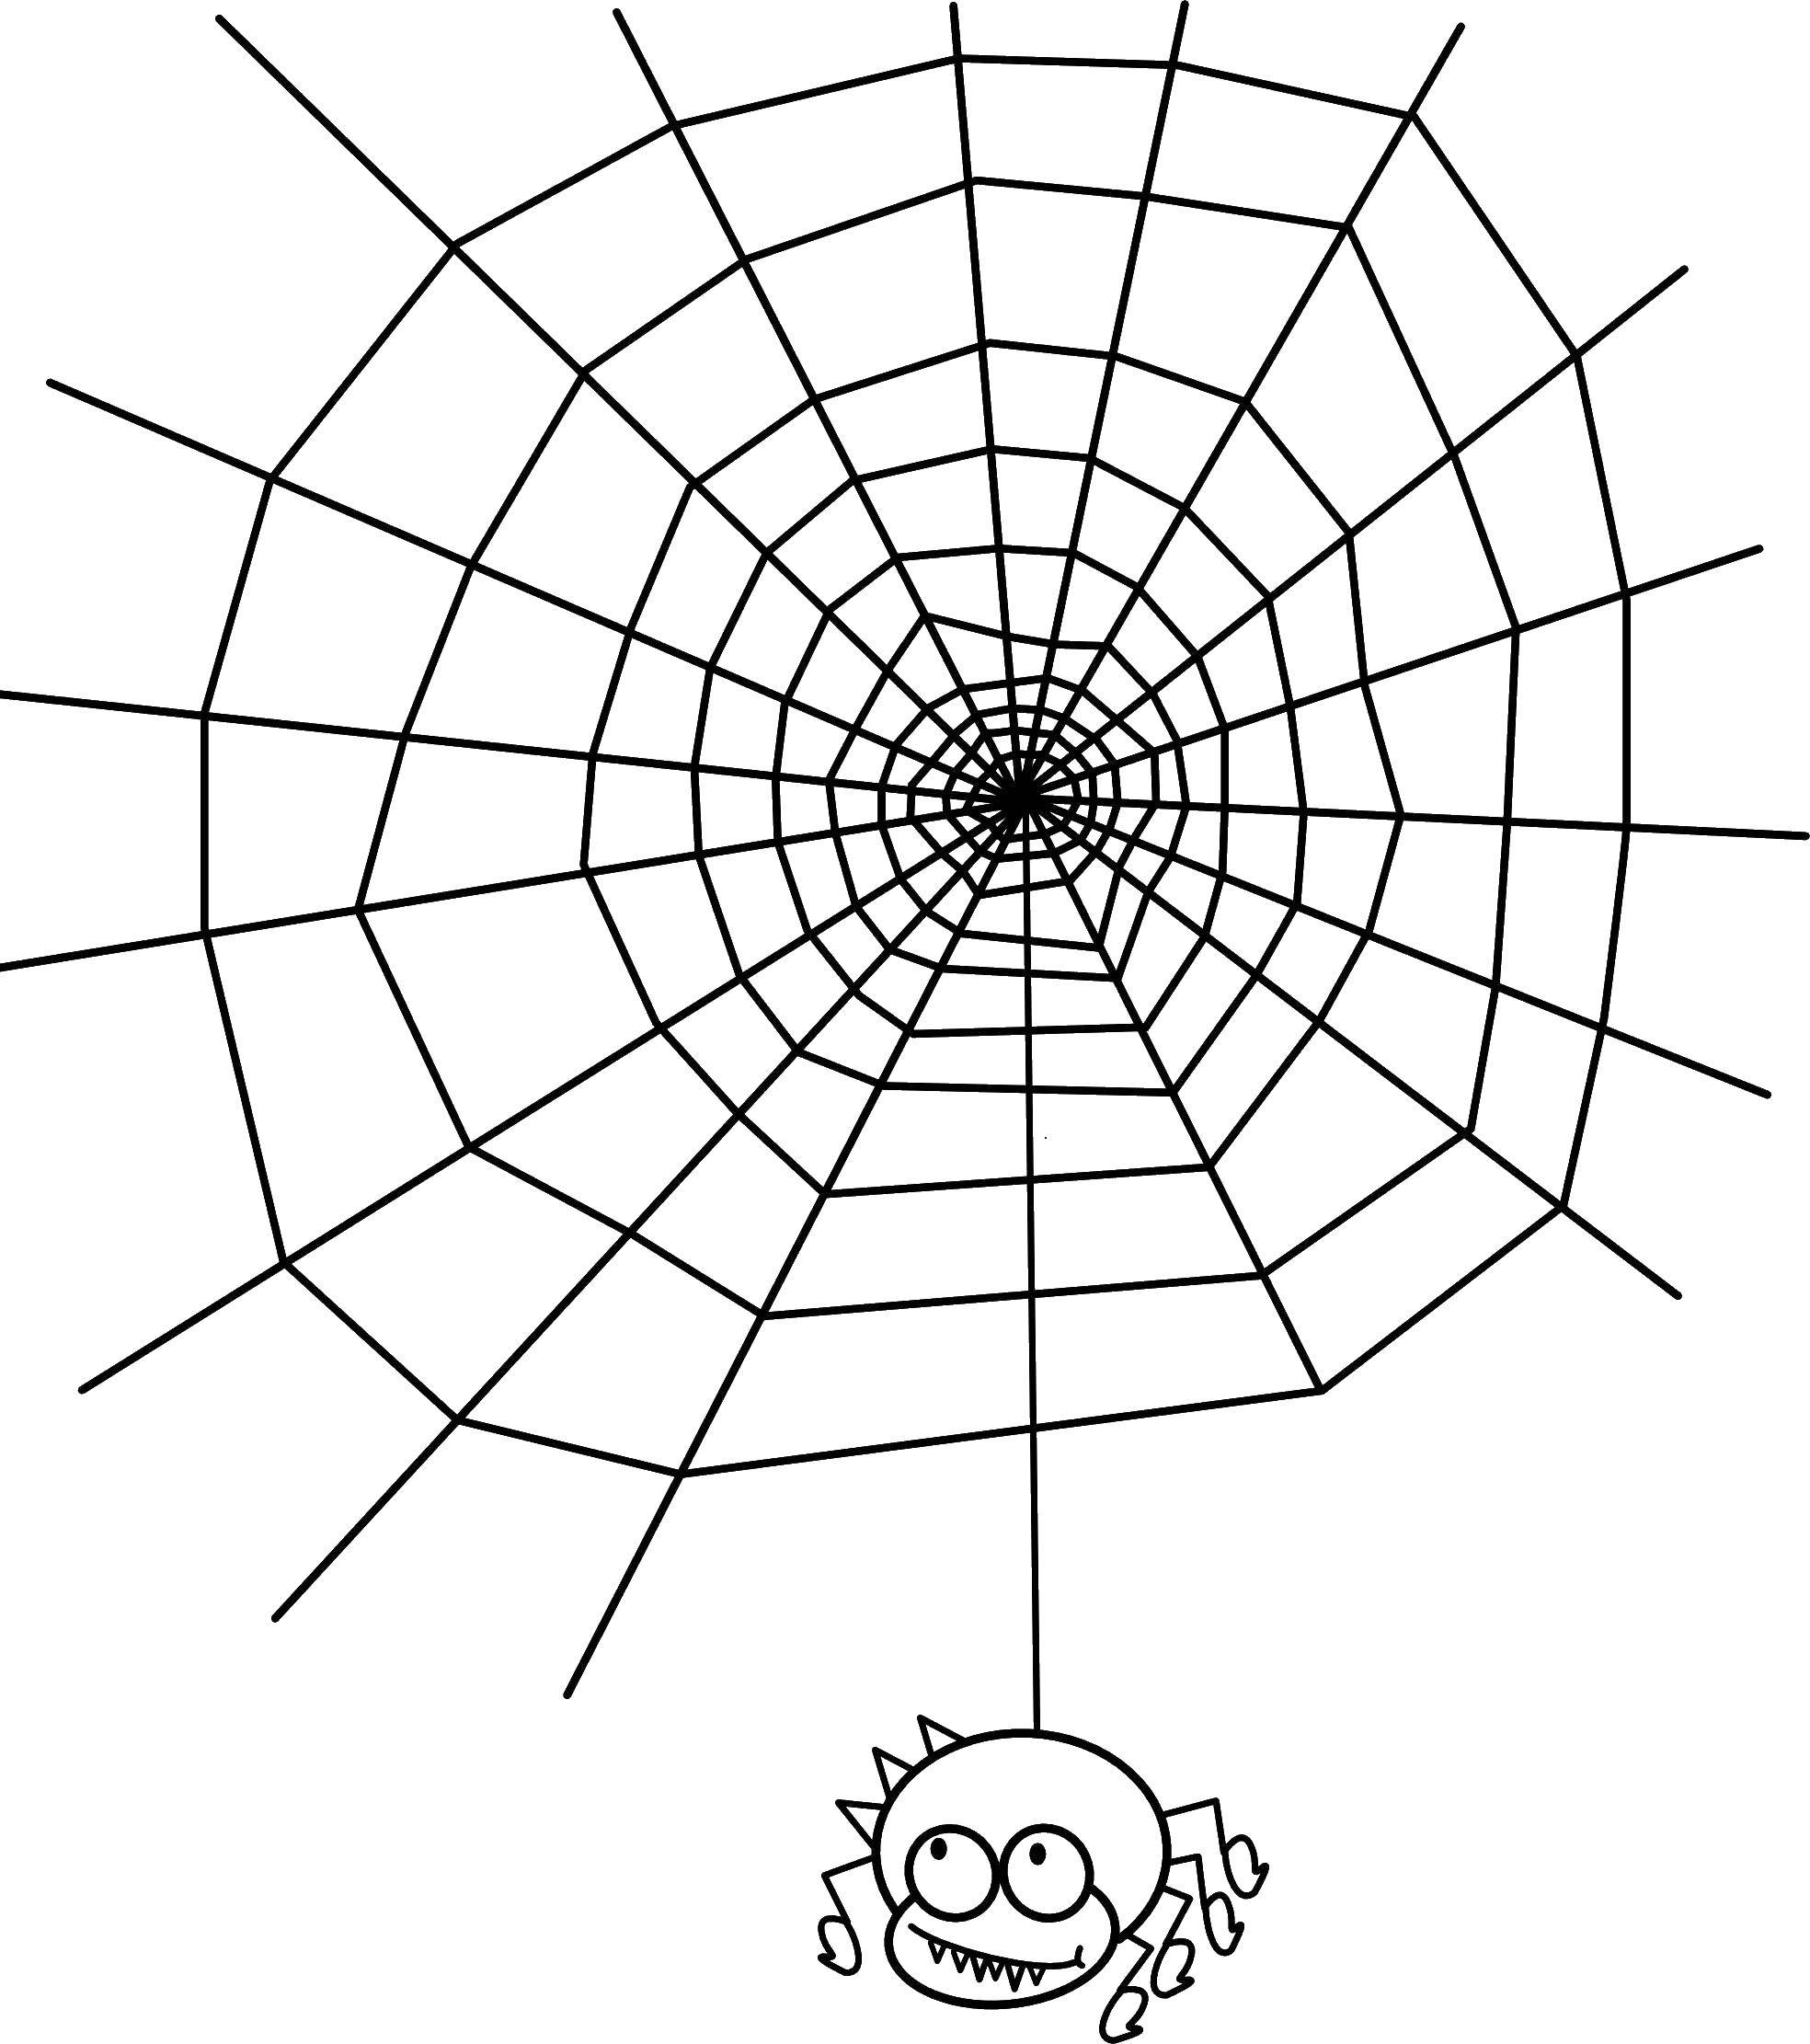 Coloring Spider on the web. Category spiders. Tags:  spider.